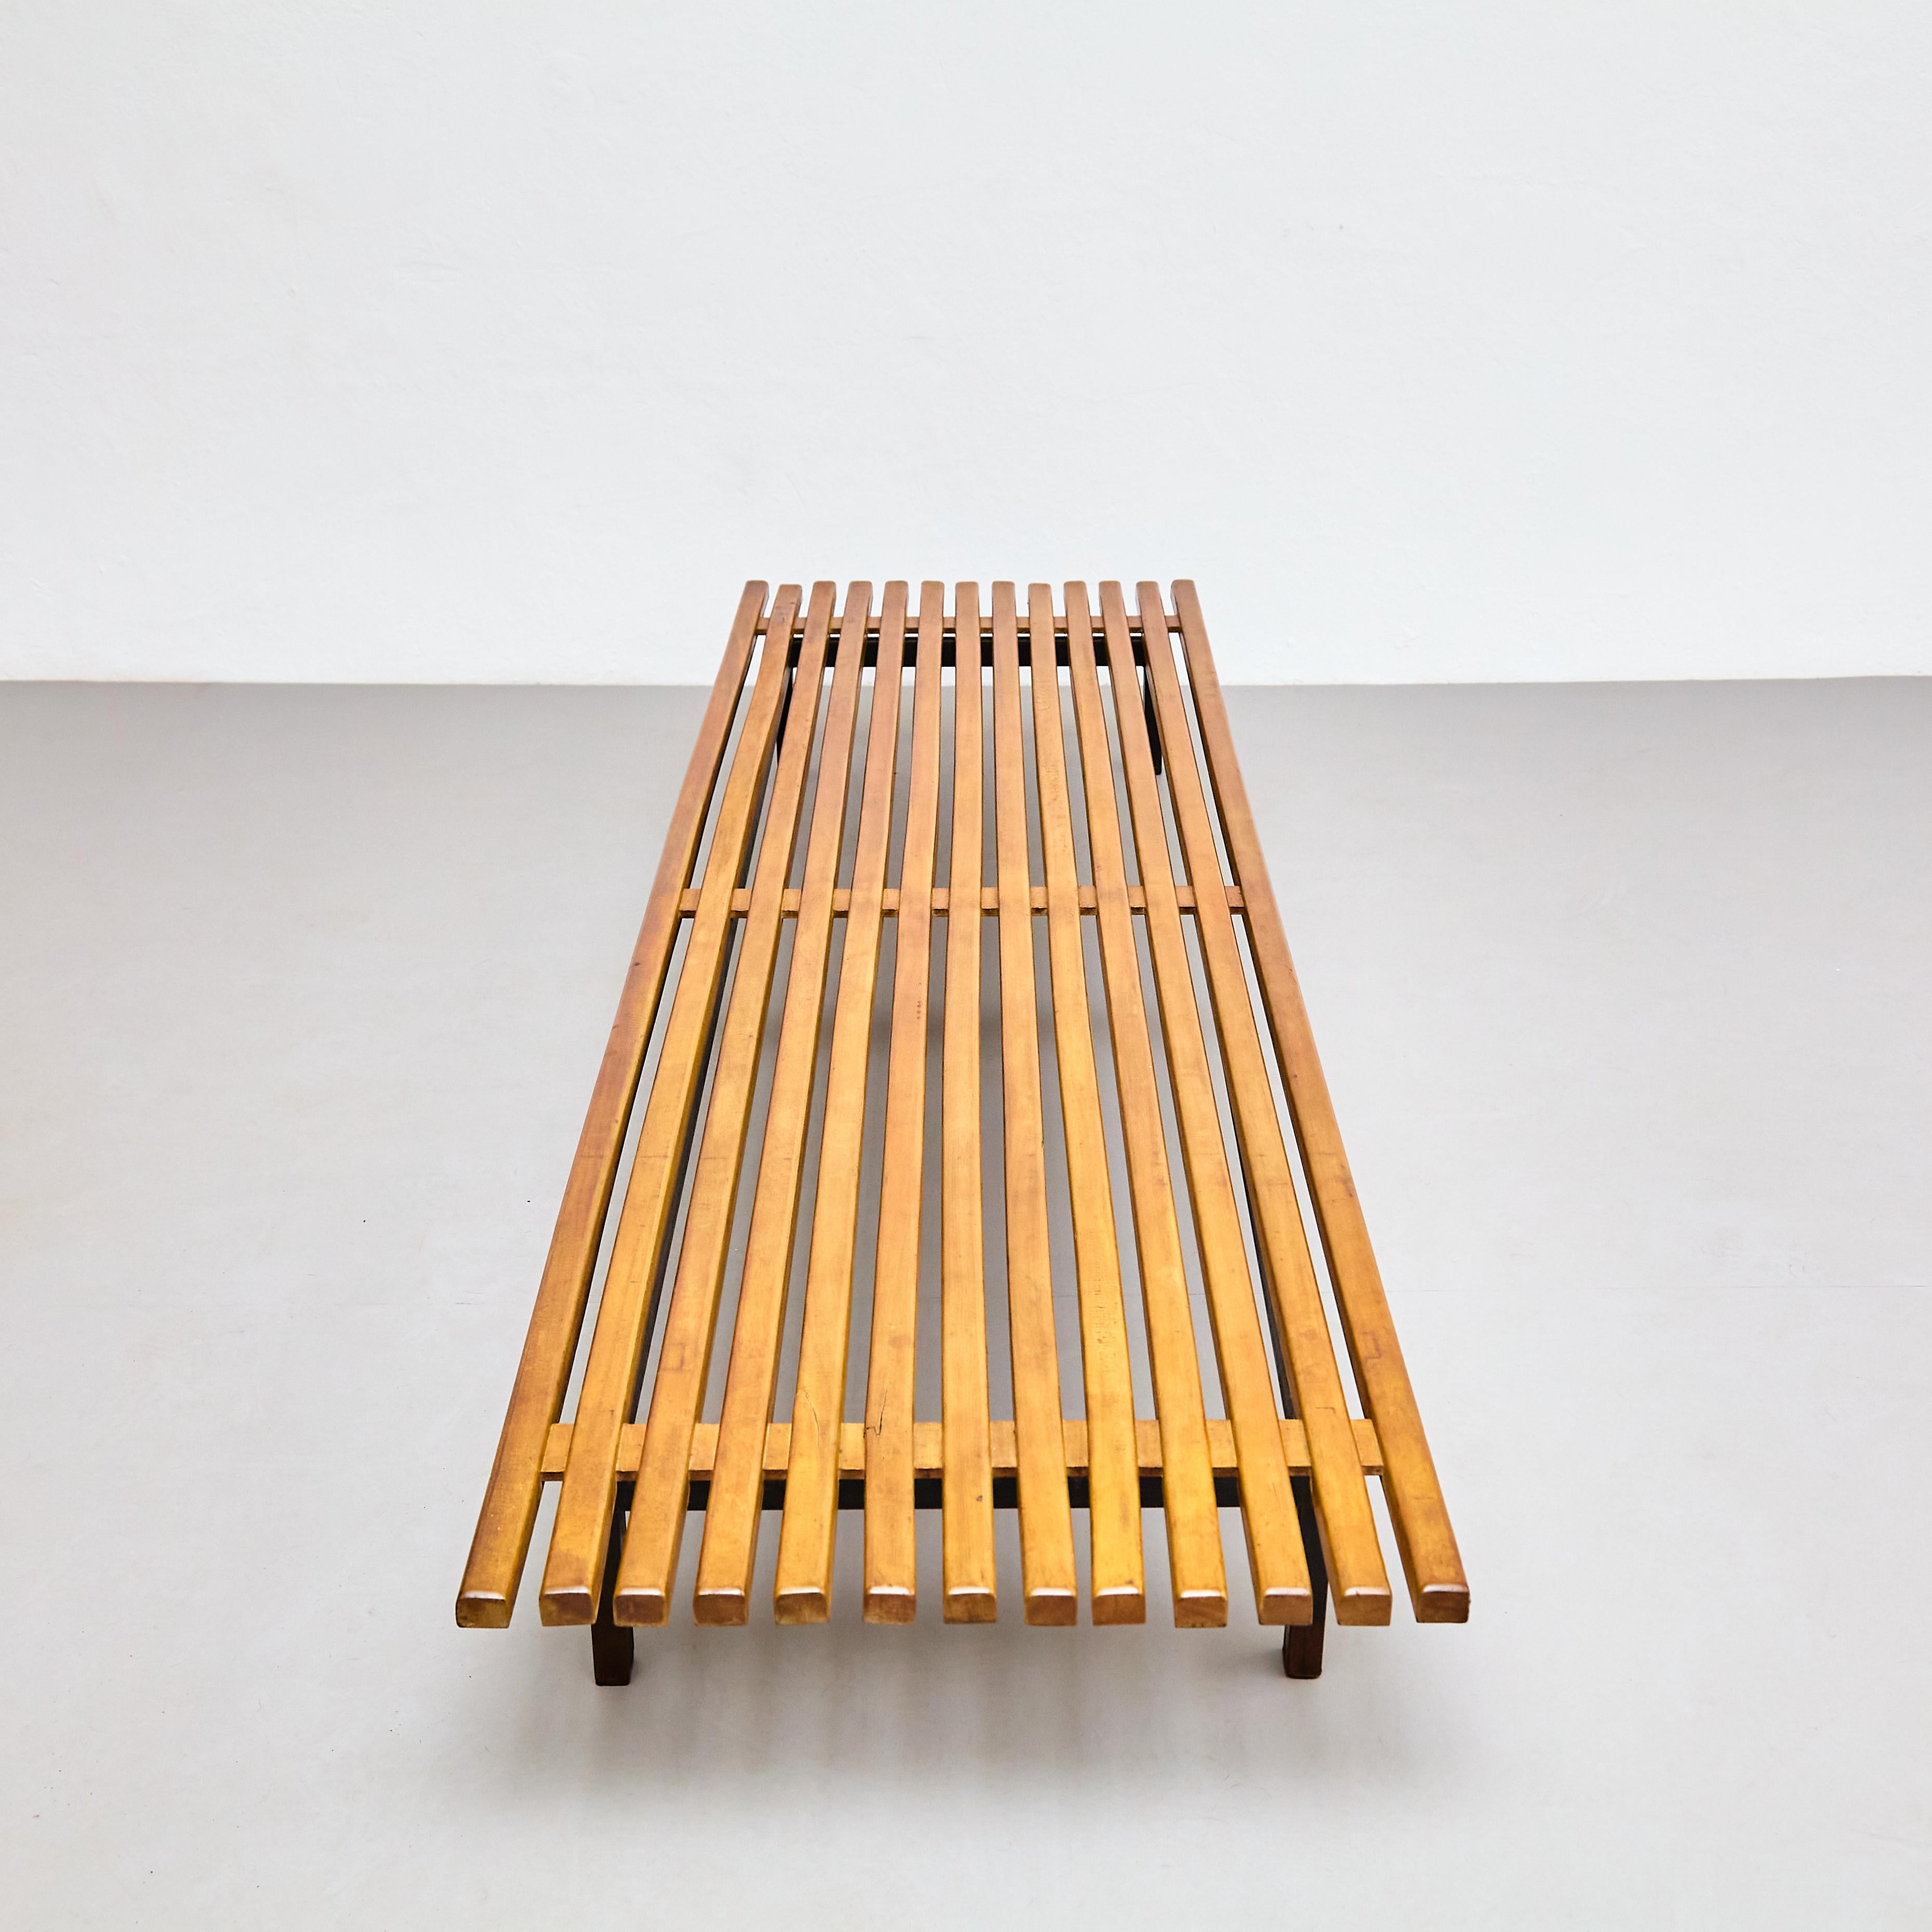 Bench designed by Charlotte Perriand.
Edited by Steph Simon.

Provenance: Cansado, Mauritania (Africa).

In original condition with minor wear consistent of age and use, preserving a beautiful patina.

Materials: 
Wood, metal 

Dimensions: